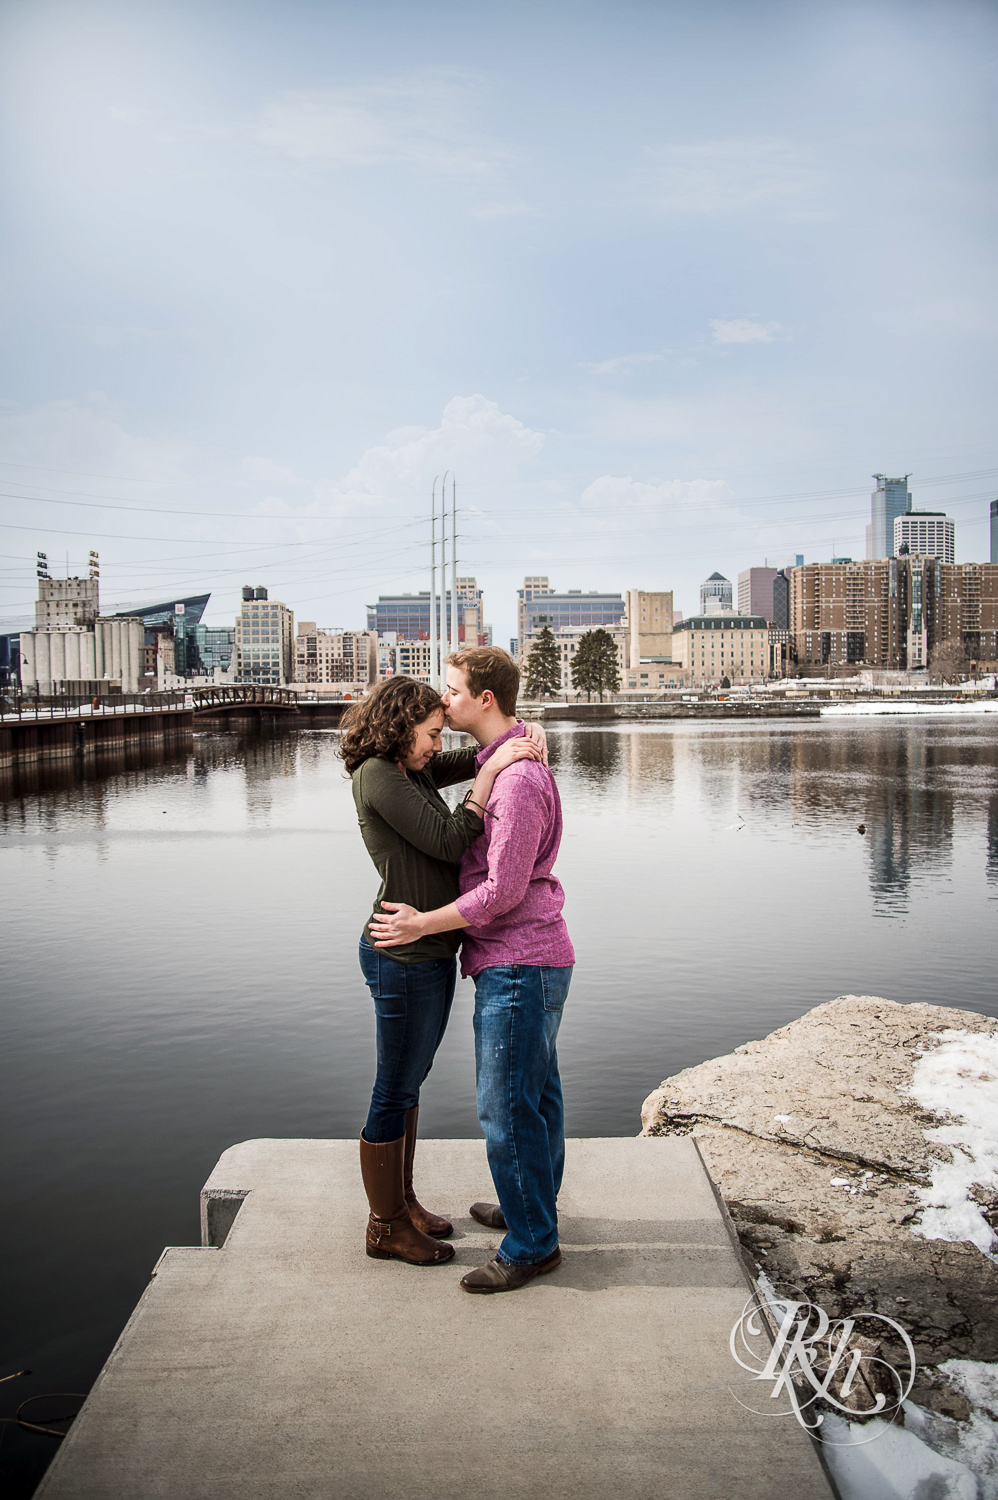 Man and woman kiss in front of the river and Minneapolis skyline during St. Anthony Main engagement photos.